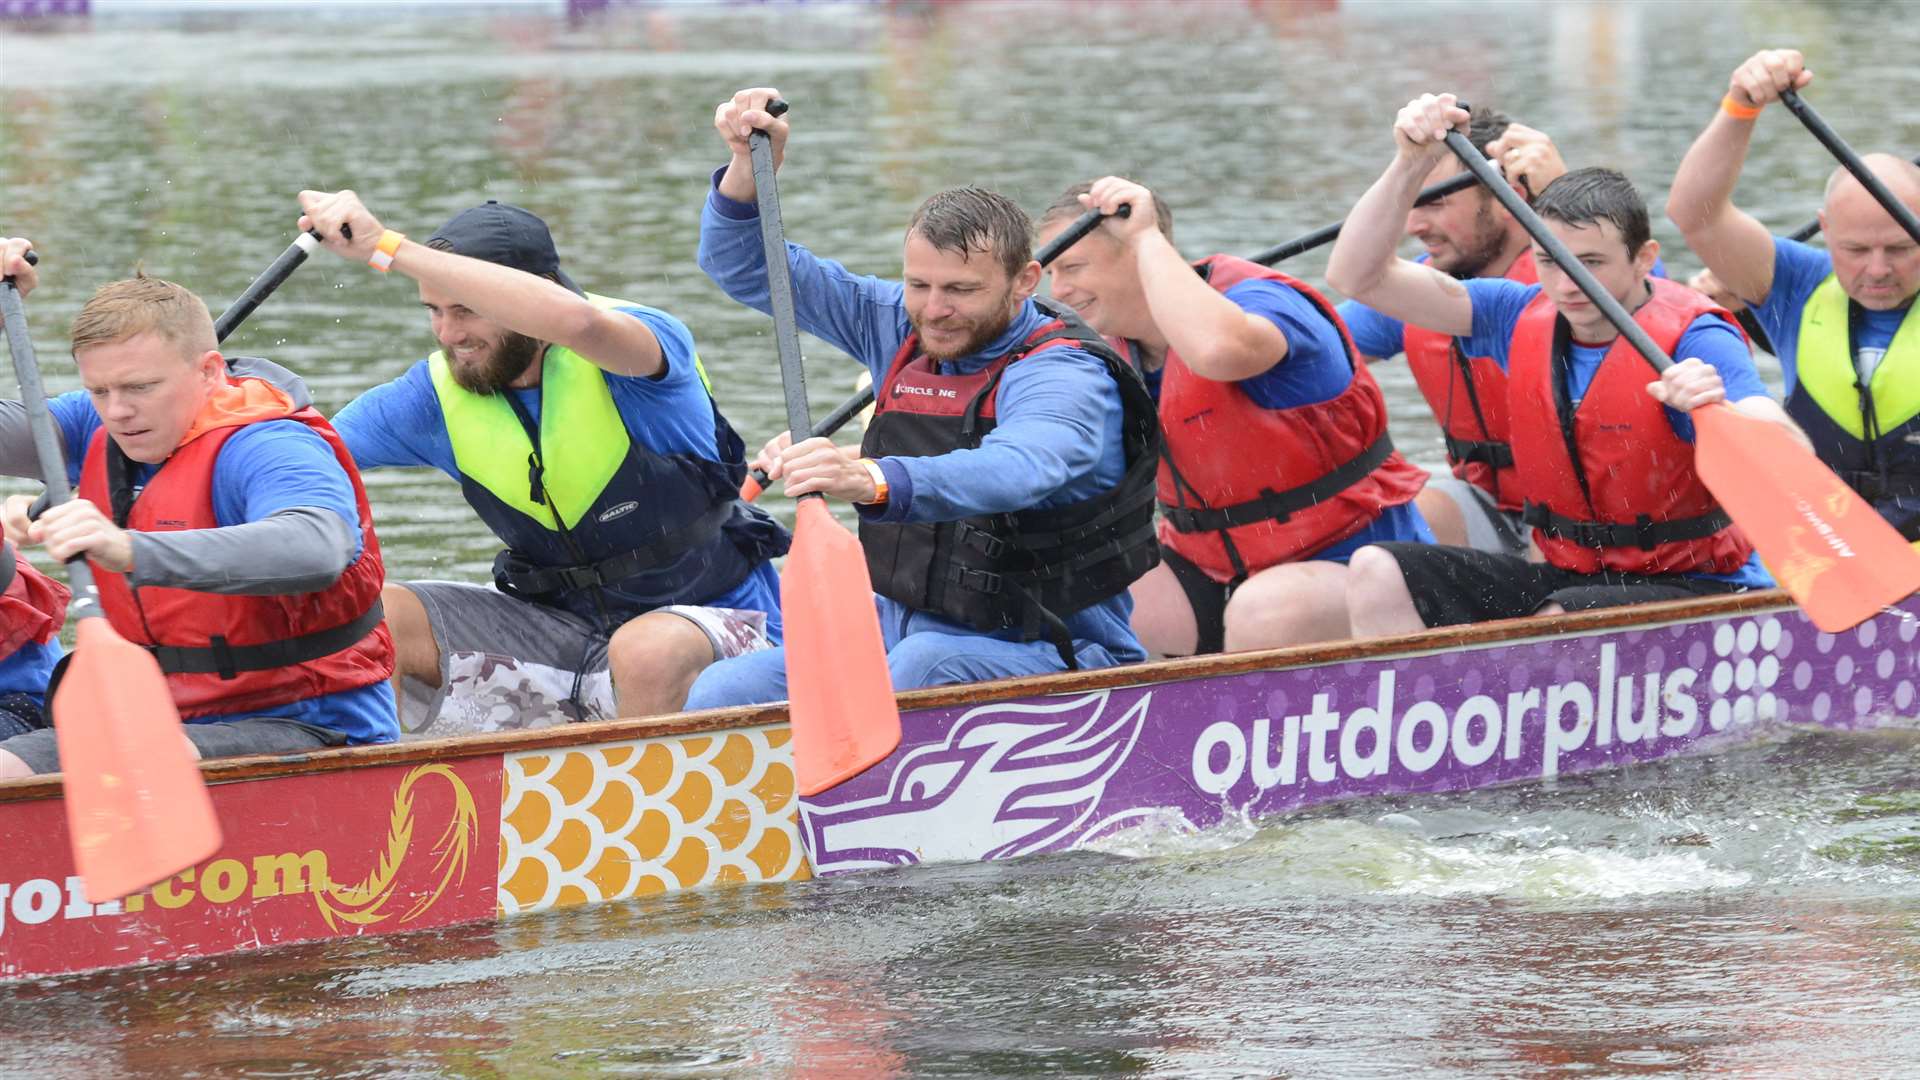 The annual KM Dragon Boat Race is a popular way for charities to raise huge sums.